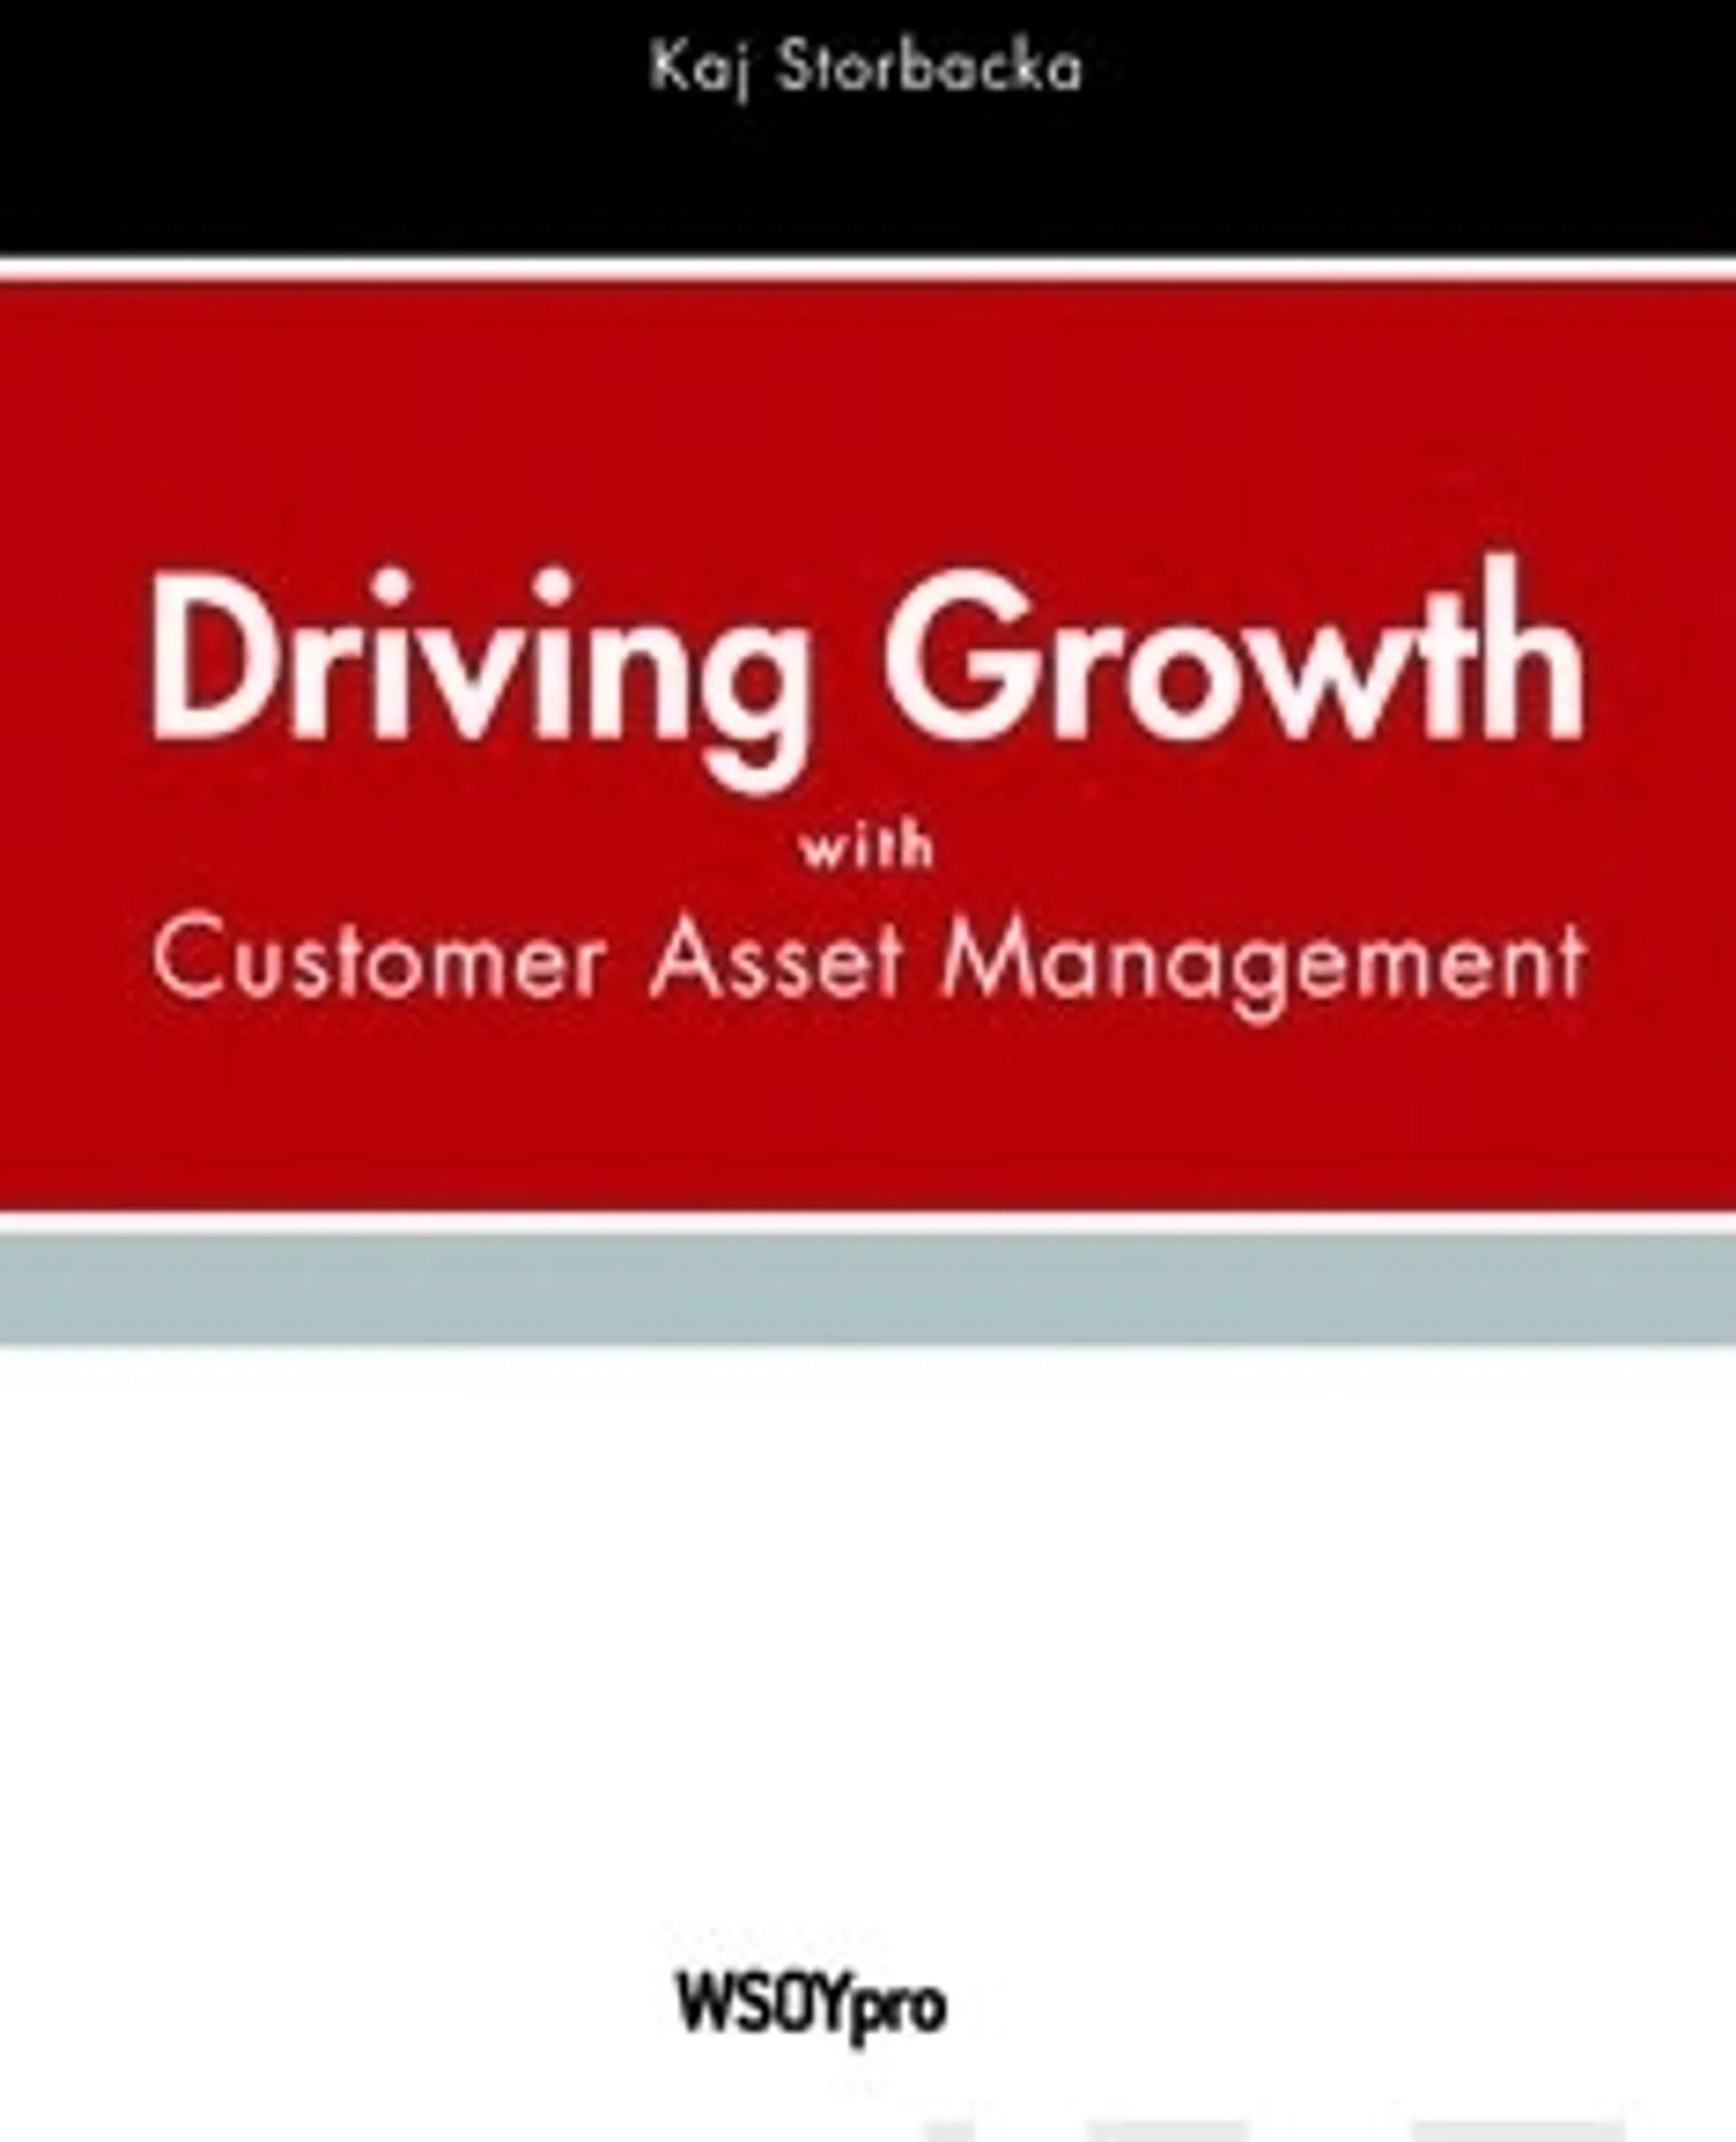 Driving Growth with Customer Asset Management